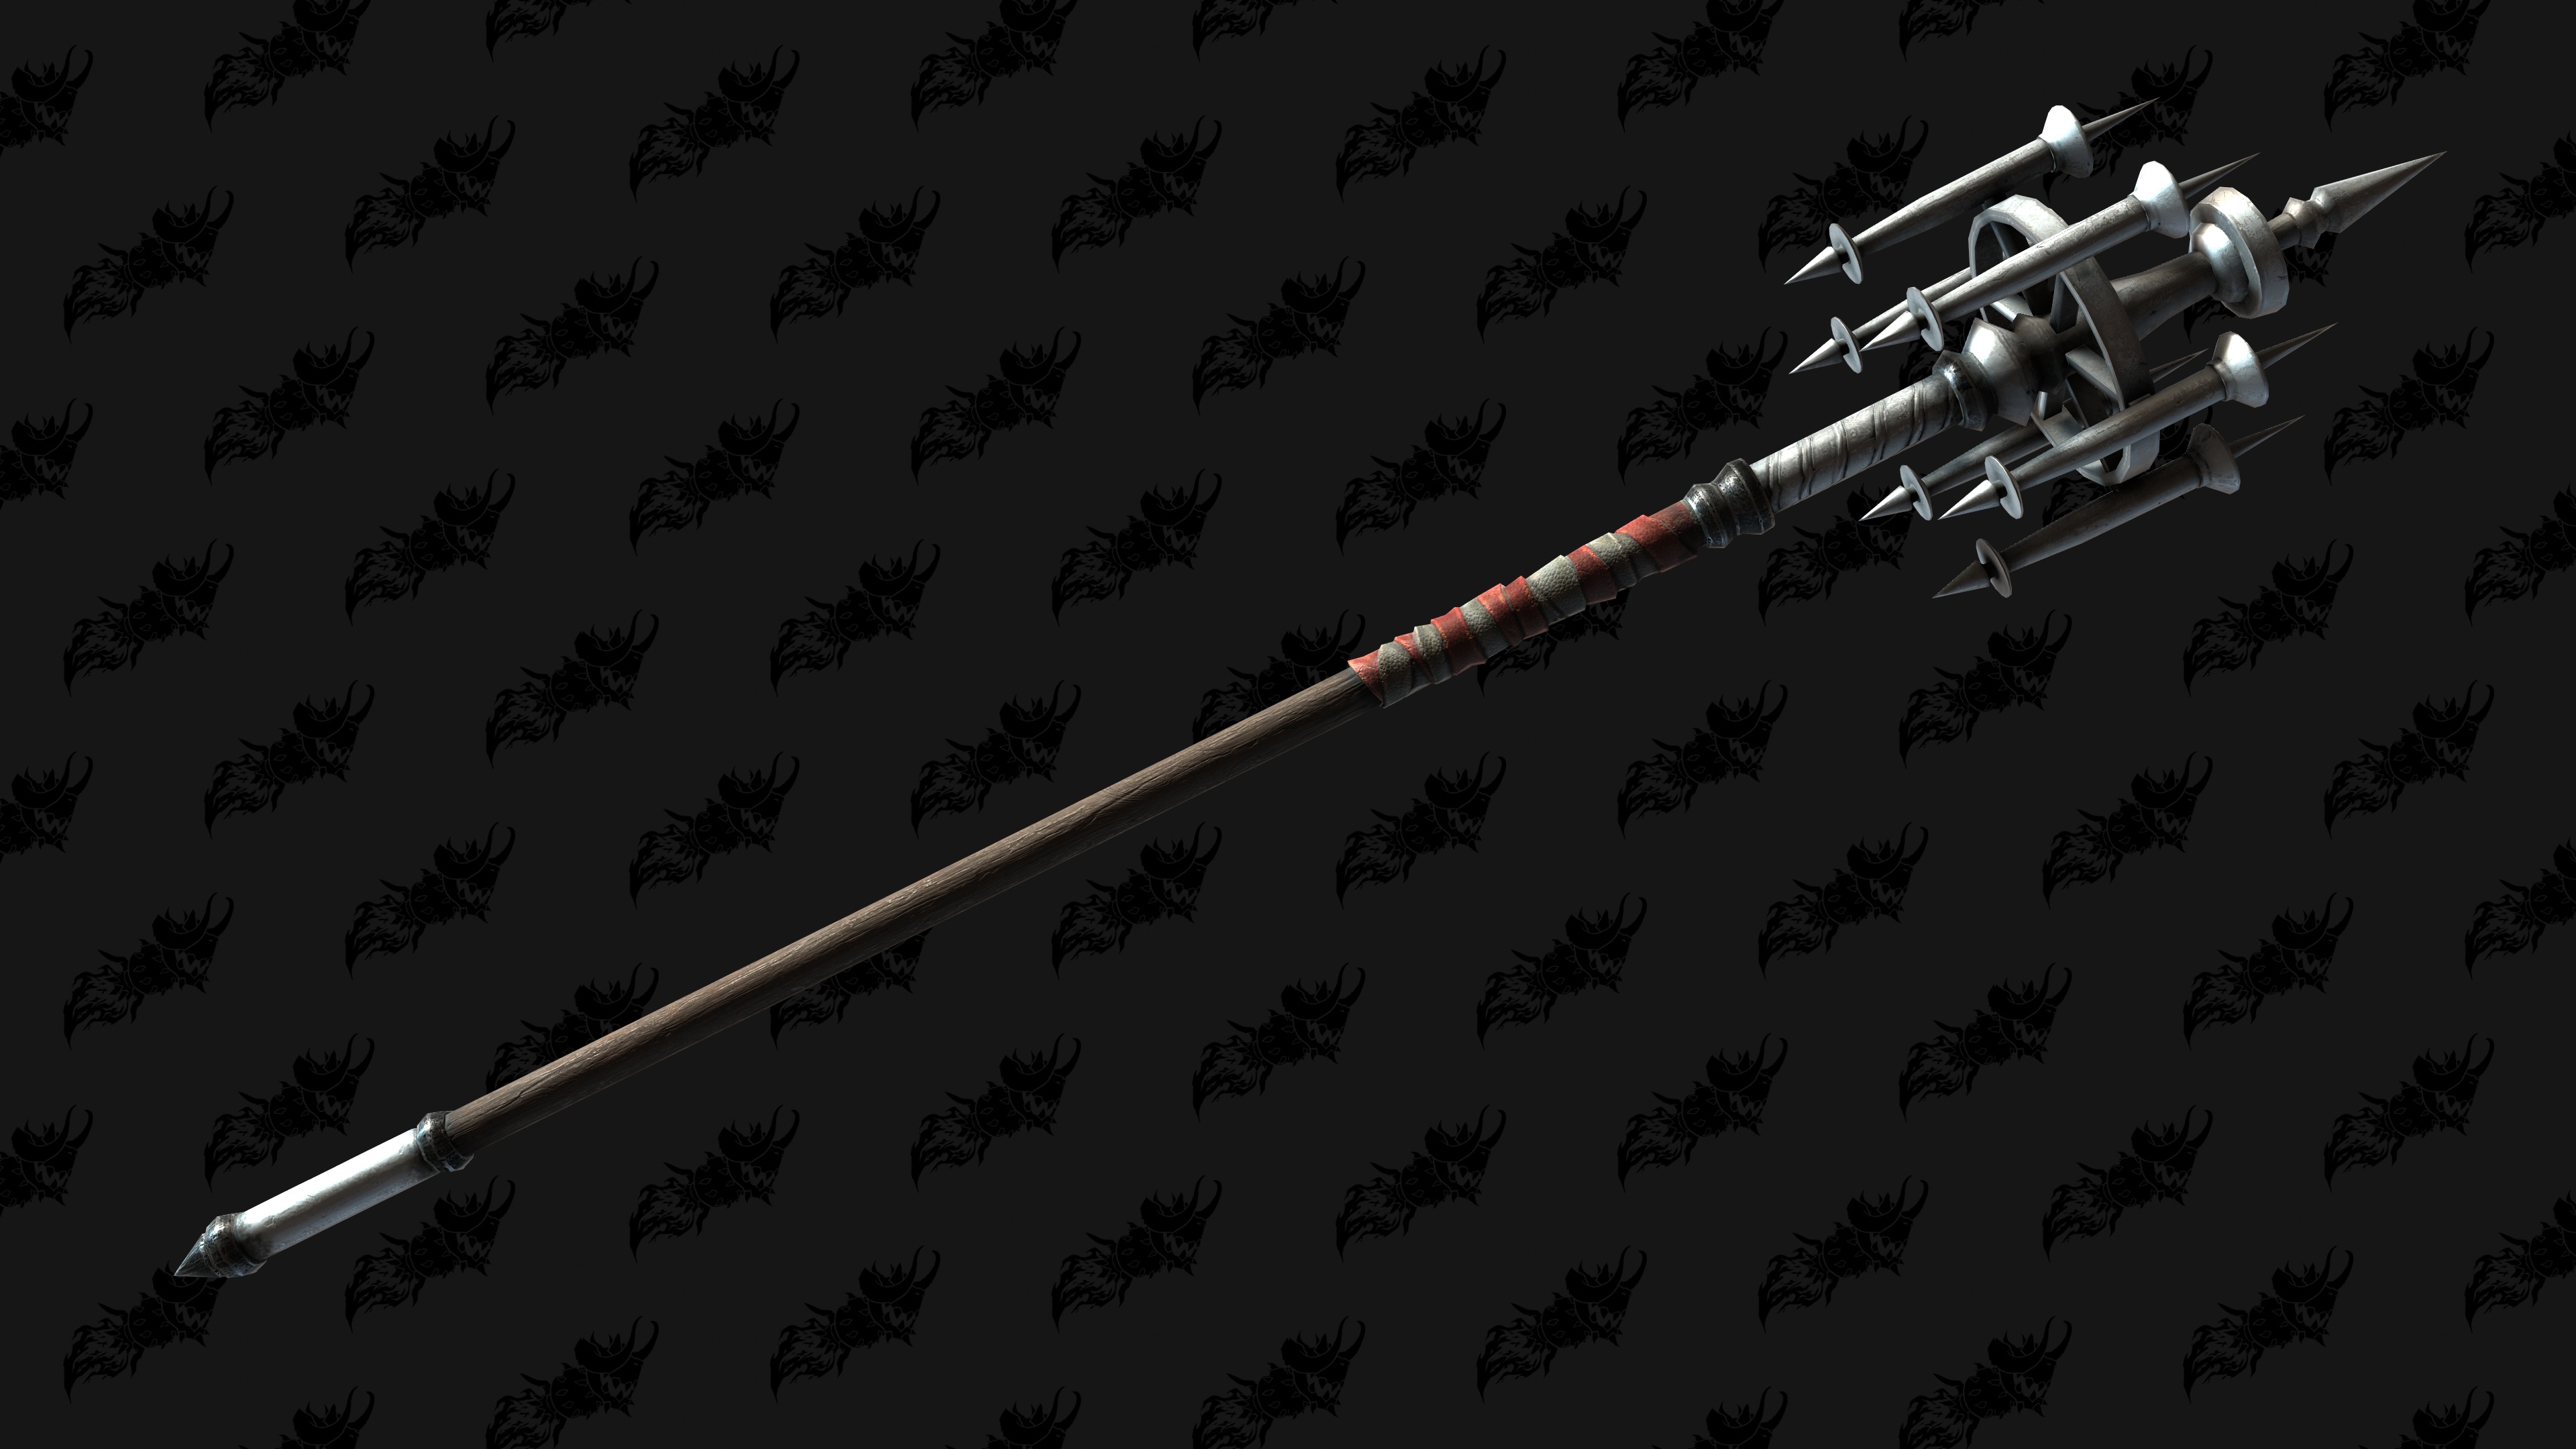 First Look At Exclusive Diablo 4 KFC Weapon Cosmetics - Wowhead News